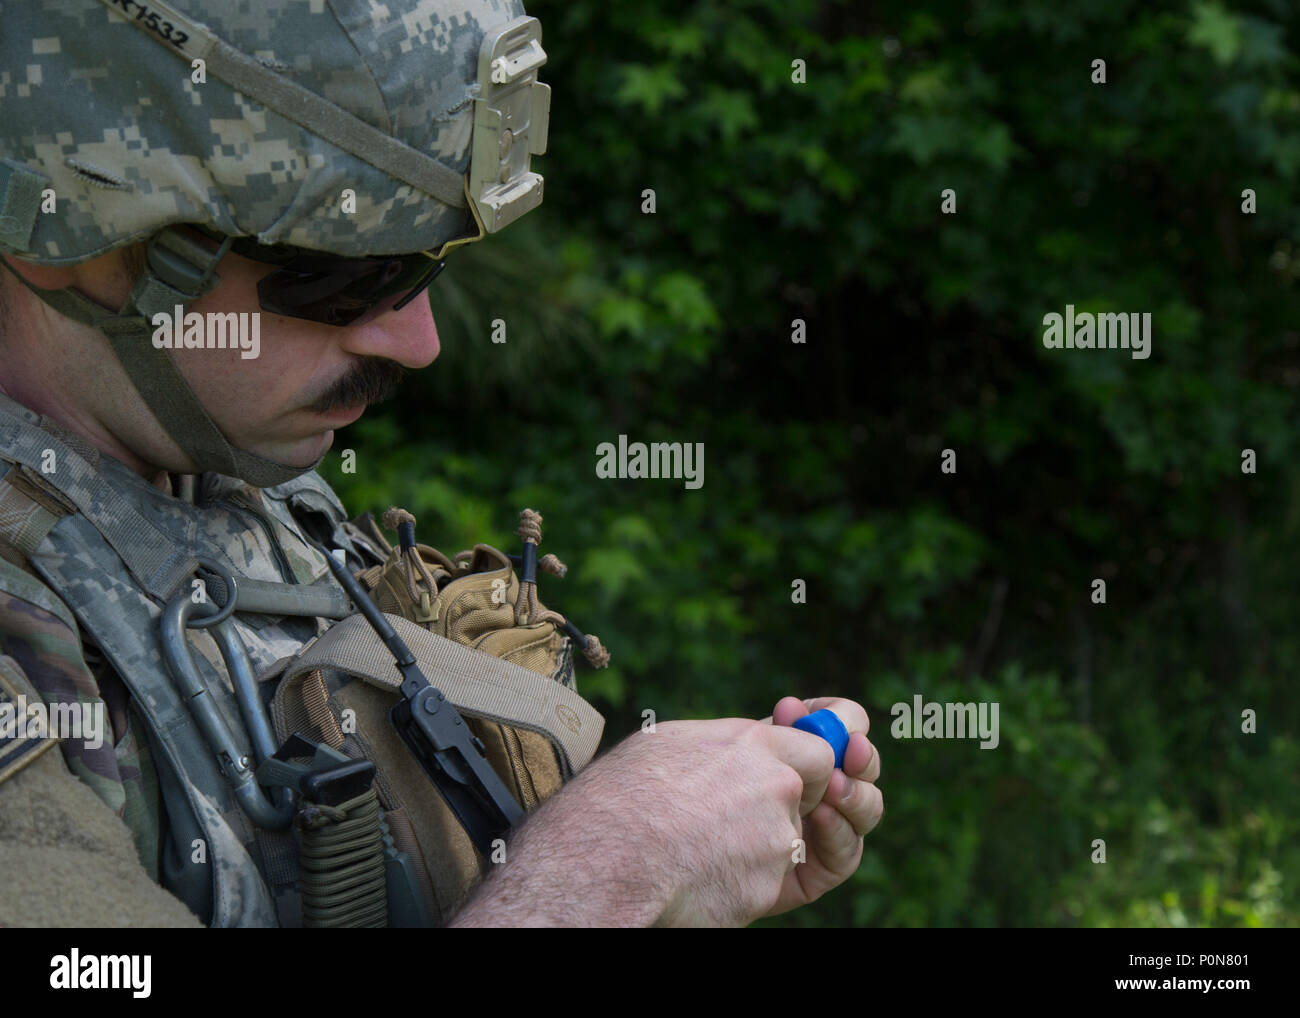 Spc. Matthew Ruben, an explosive ordnance disposal team member with 718th Ordnance Company from Baunholder, Germany, feeds a line of detination cord through a water bottle cap during the 2018 Ordnance Crucible at Fort A.P. Hill, Va., June 5, 2018. EOD (Explosive Ordnance Disposal) teams are assessed on operations and associated tasks required to provide EOD support to unified land operations to eliminate and/or reduce explosive threats . The Ordnance Crucible is designed to test Soldiers' teamwork and critical thinking skills as they apply technical solutions to real world problems improving r Stock Photo